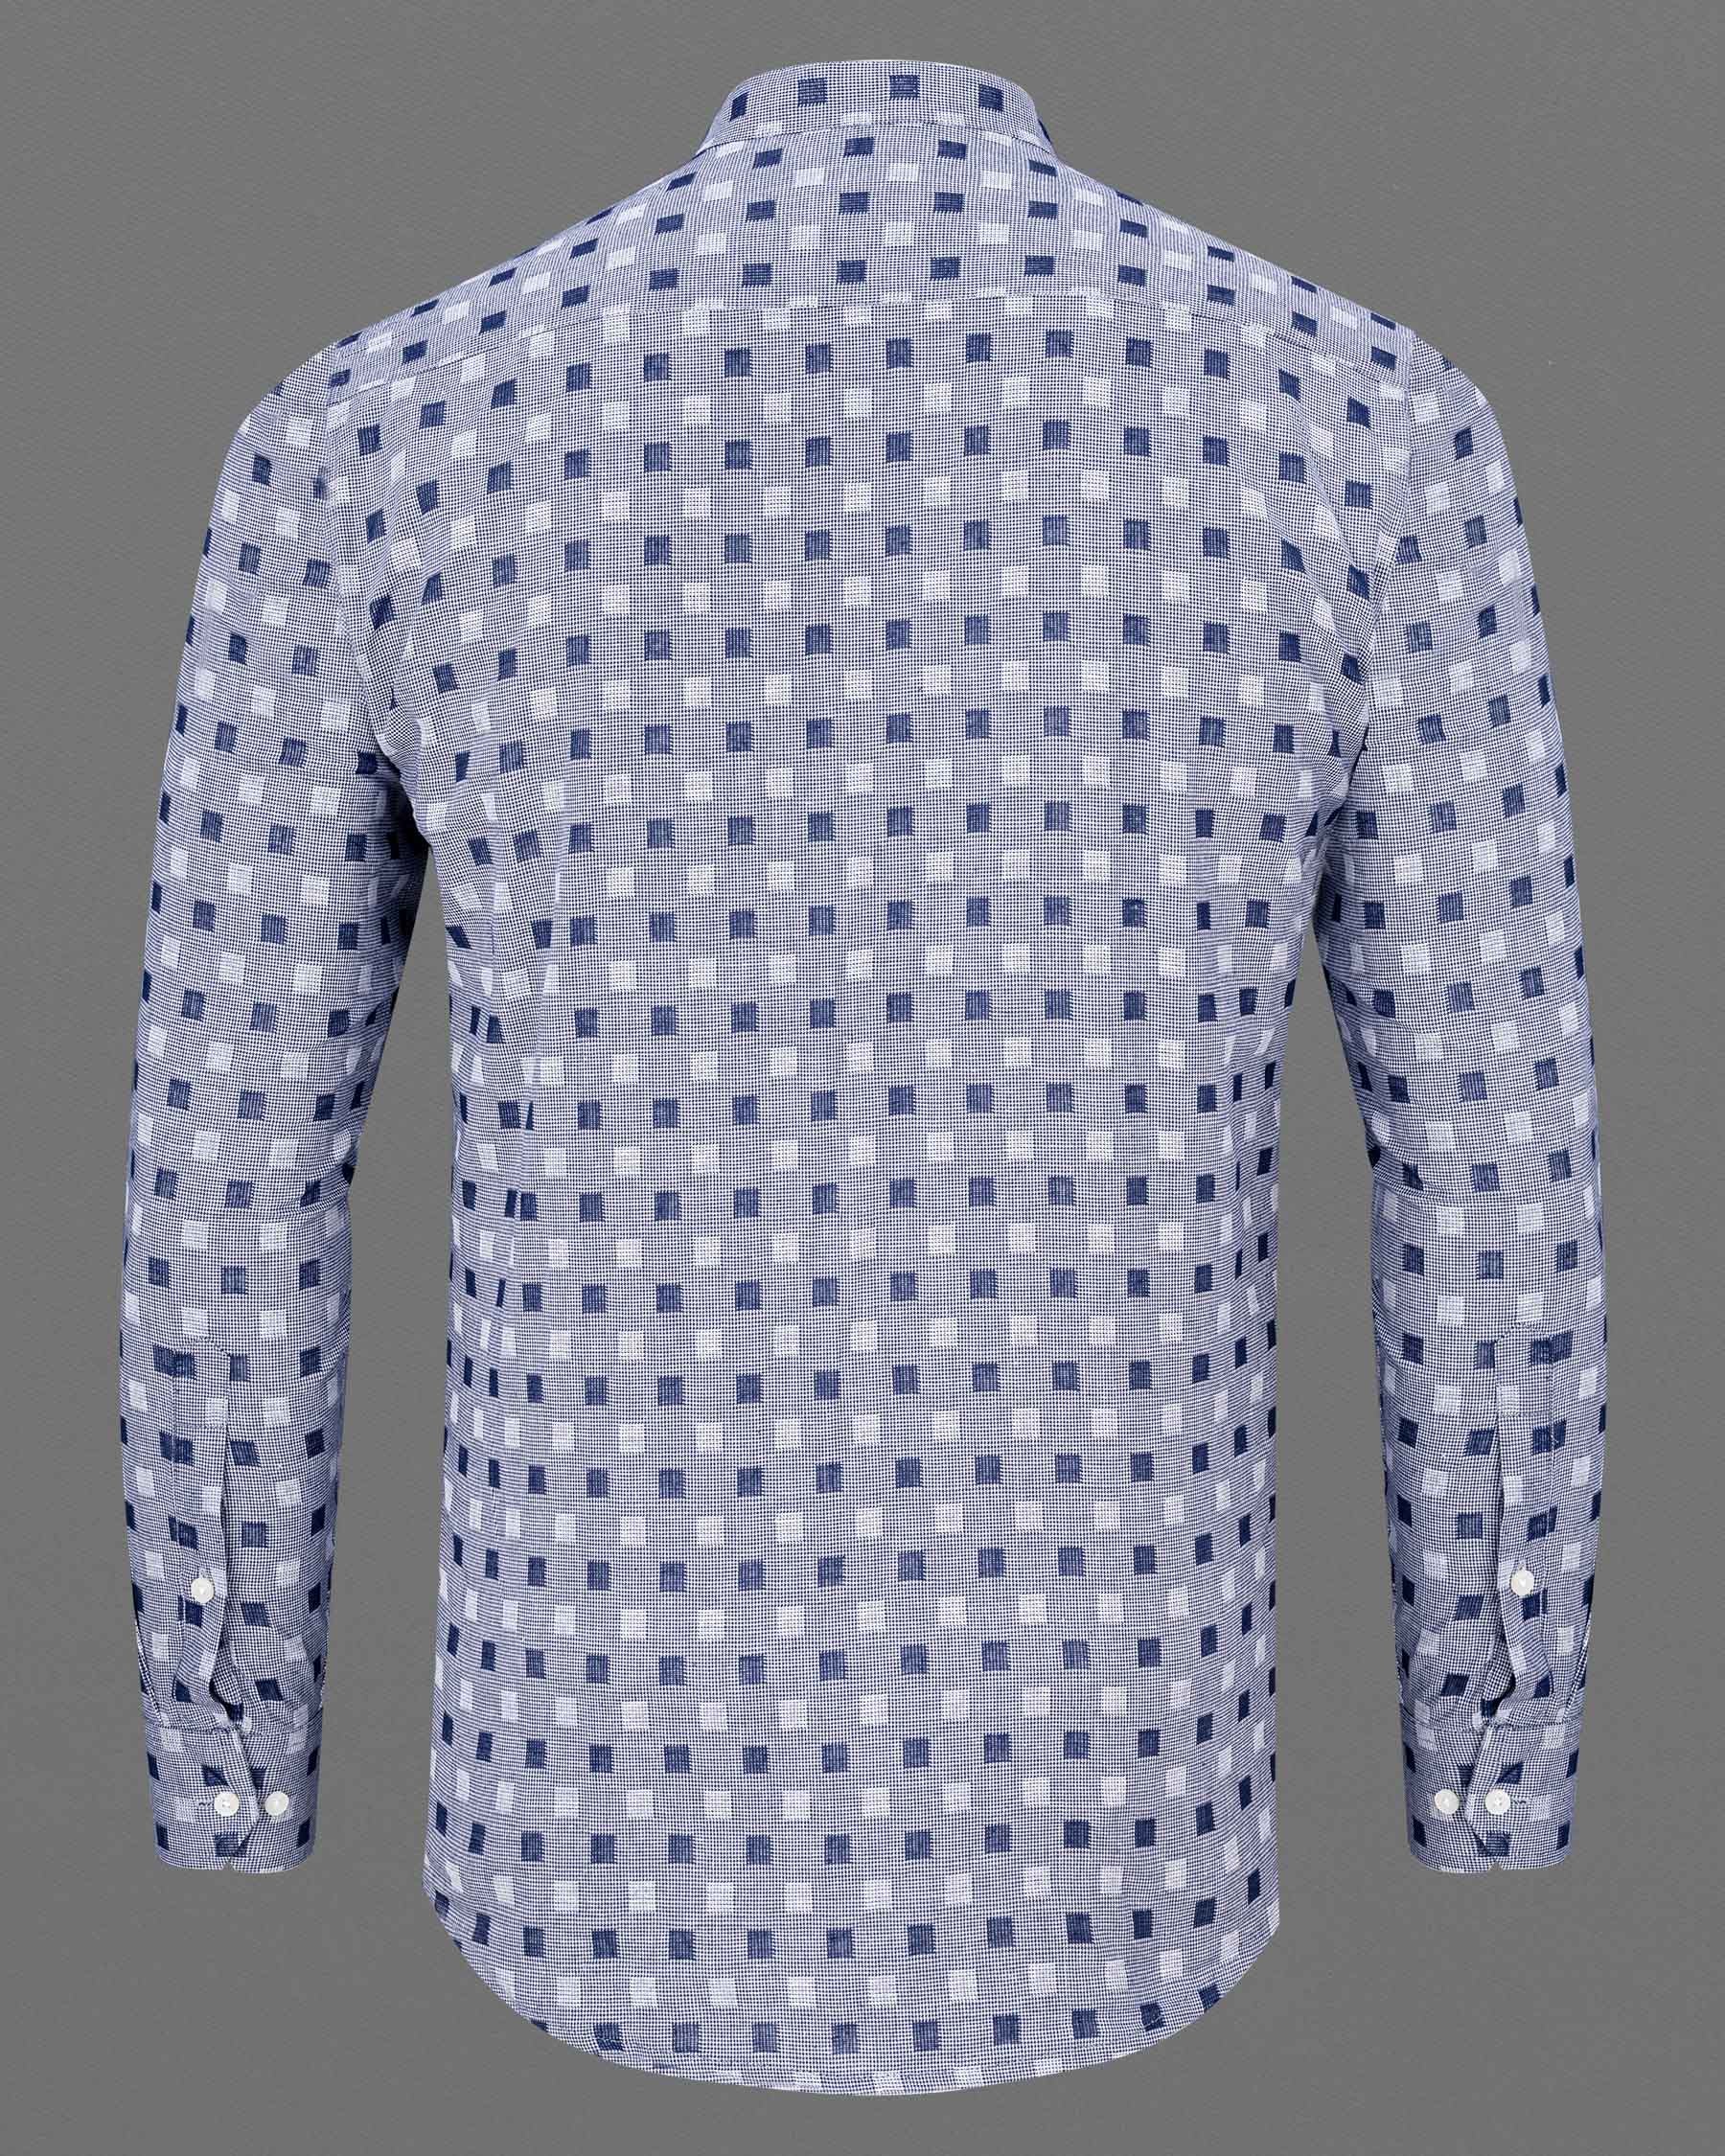 Meteorite Blue and White Square Dobby Textured Premium Giza Cotton Shirt 7277-M-38, 7277-M-H-38, 7277-M-39, 7277-M-H-39, 7277-M-40, 7277-M-H-40, 7277-M-42, 7277-M-H-42, 7277-M-44, 7277-M-H-44, 7277-M-46, 7277-M-H-46, 7277-M-48, 7277-M-H-48, 7277-M-50, 7277-M-H-50, 7277-M-52, 7277-M-H-52